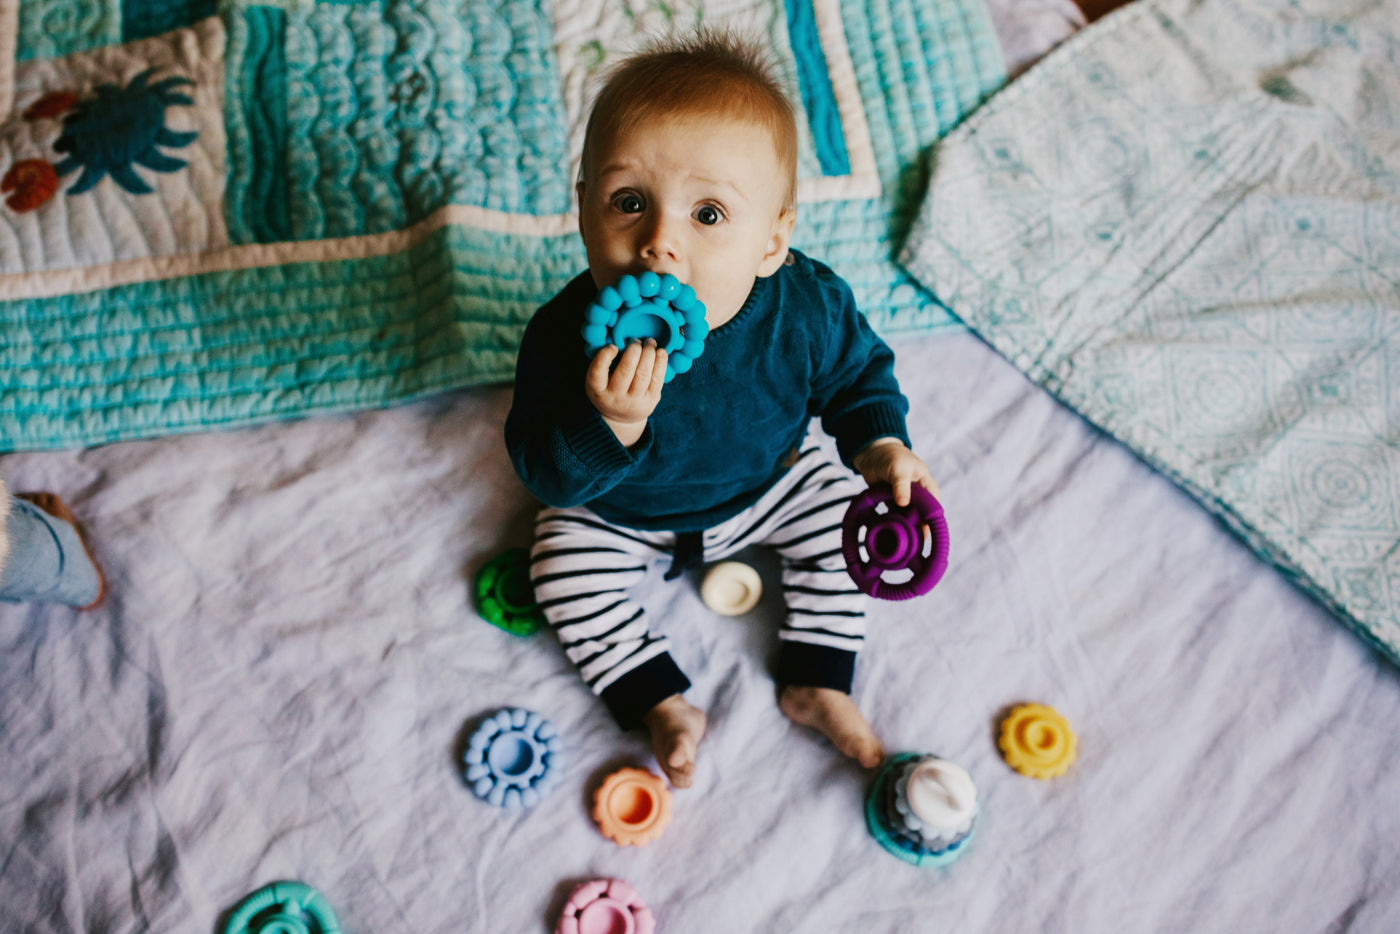 Baby on a mat with teether in mouth